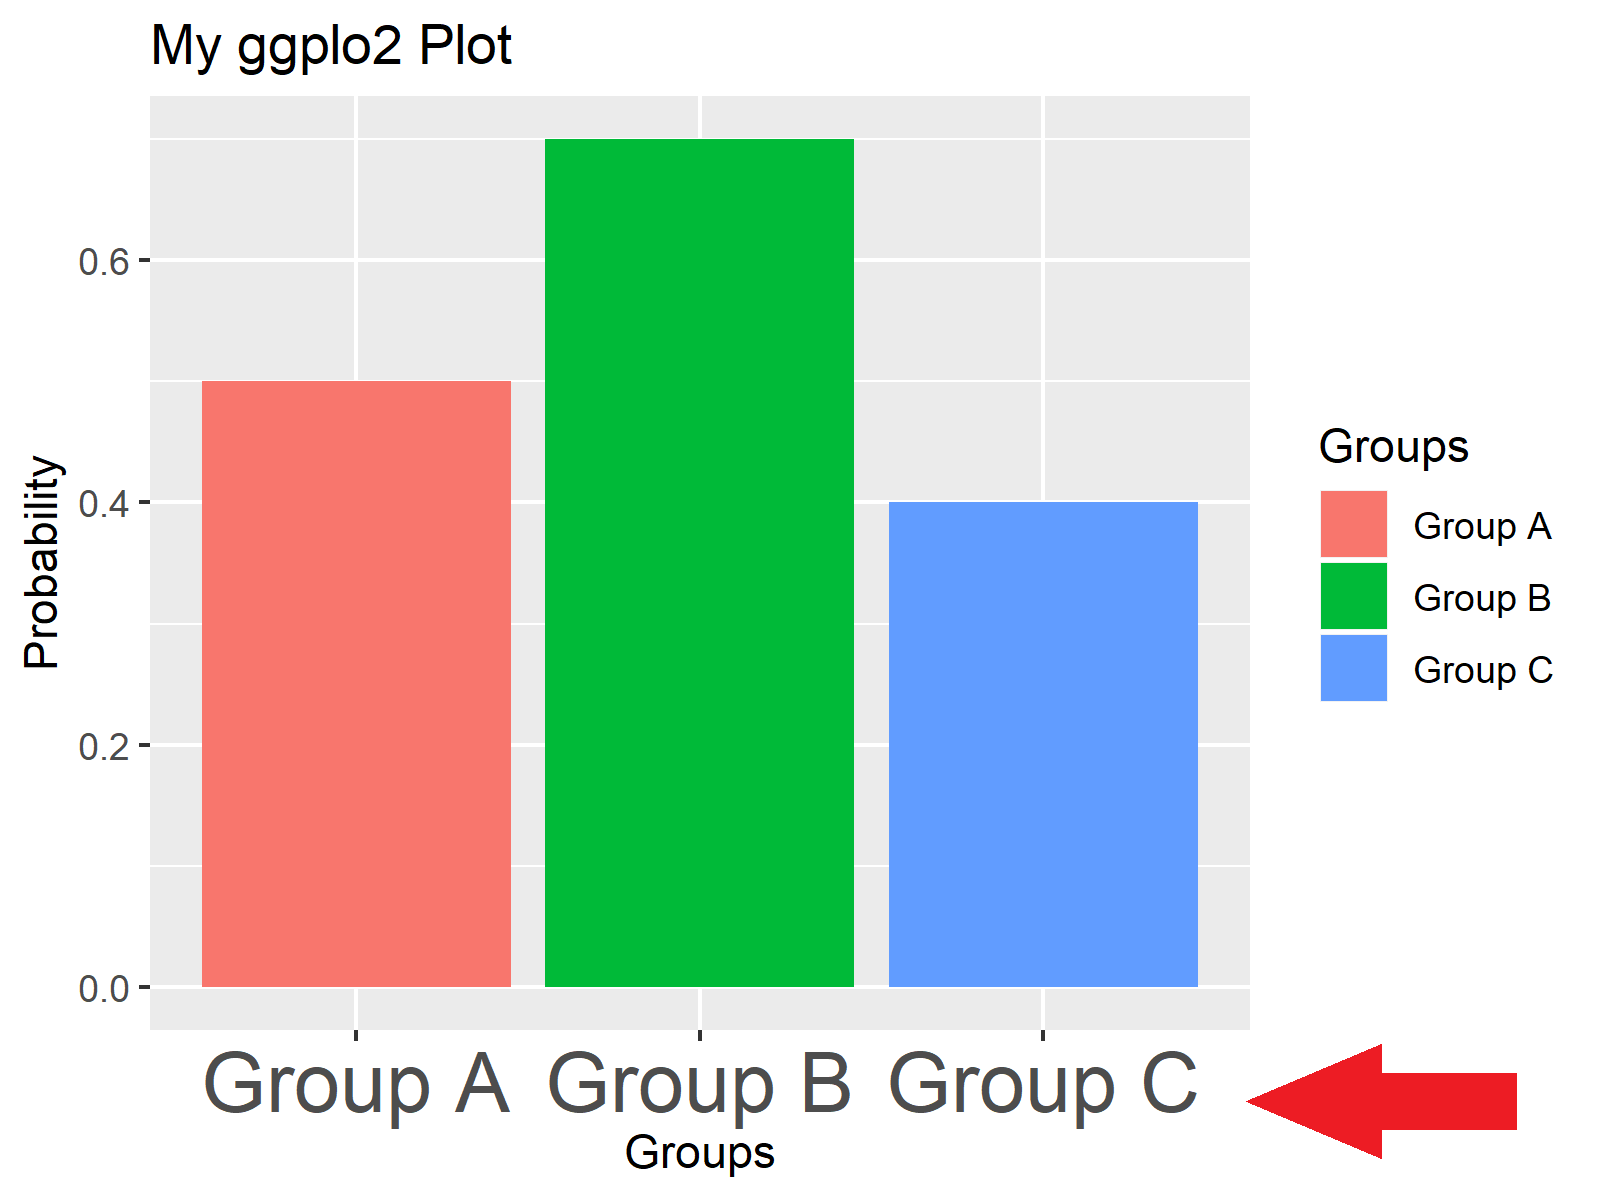 r ggplot2 plot font size of x axis text